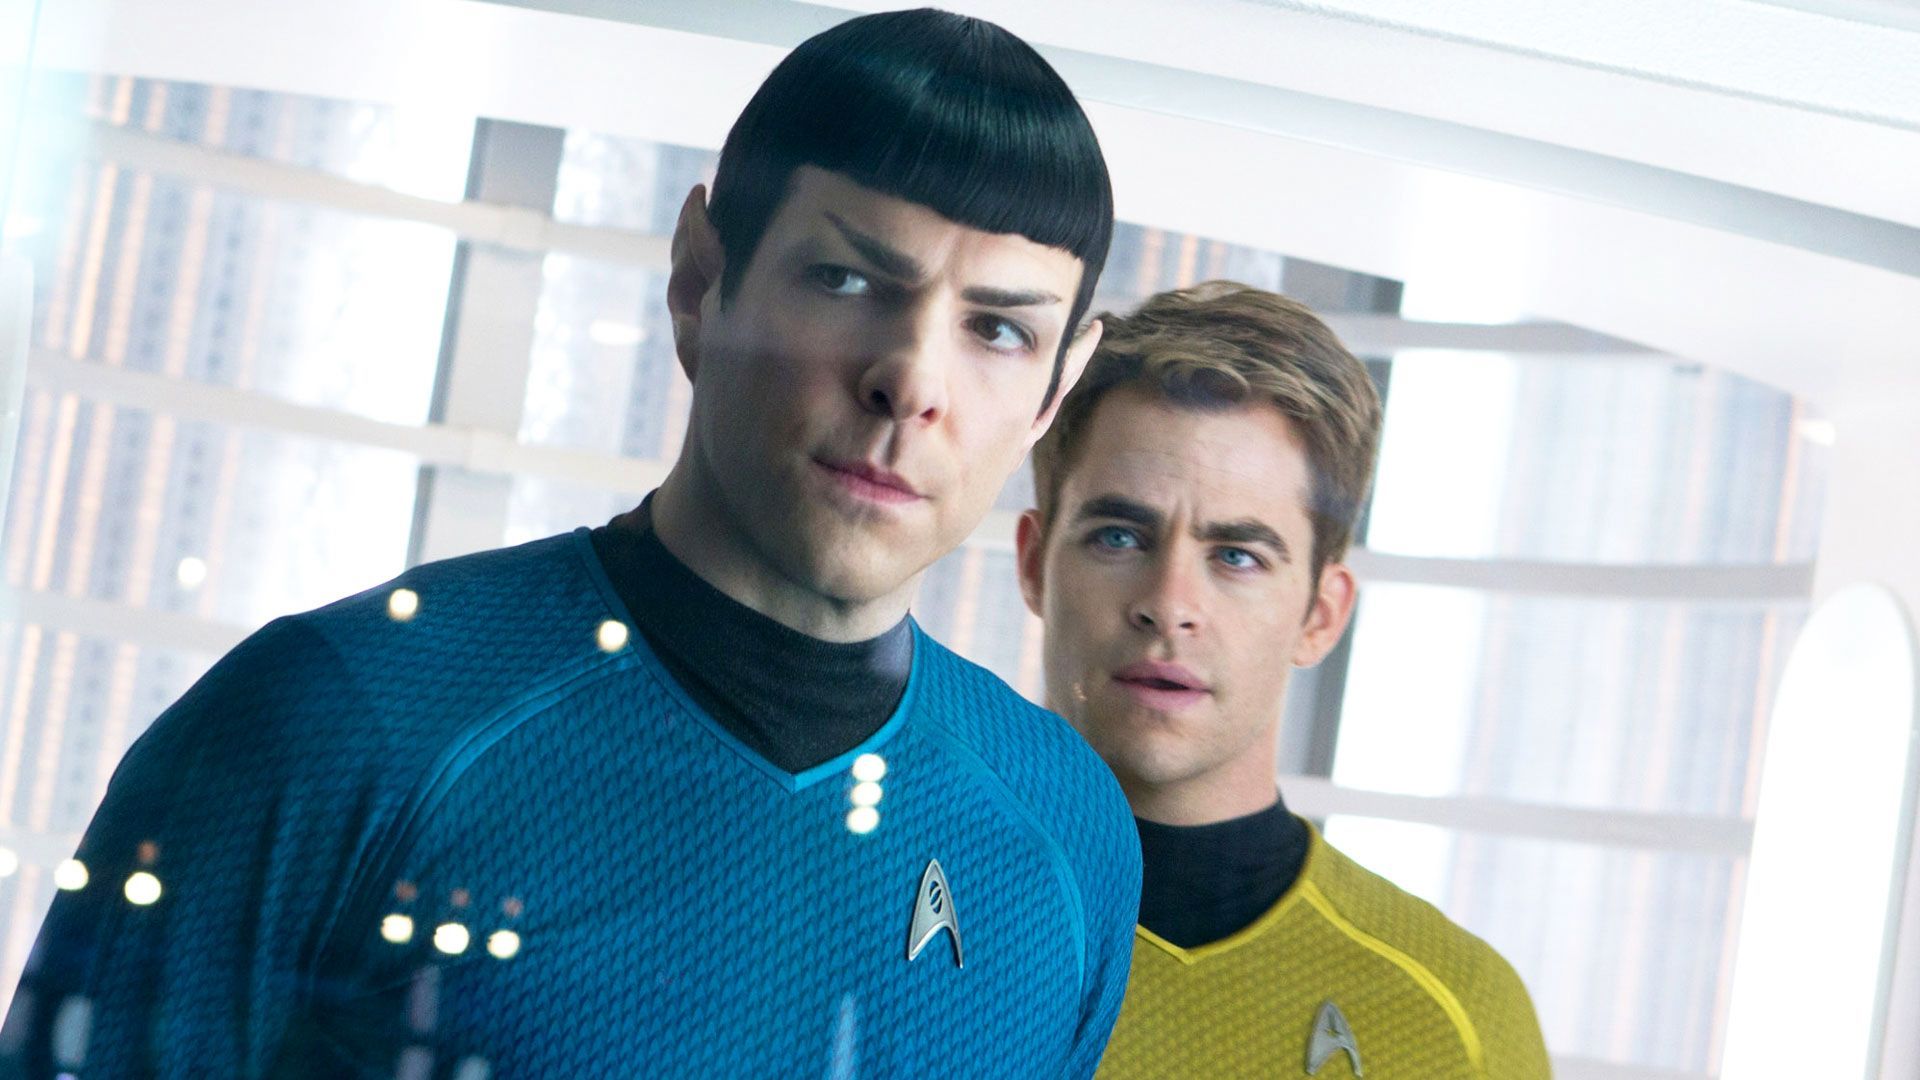 Star Trek 4 release date, cast and has it been cancelled?